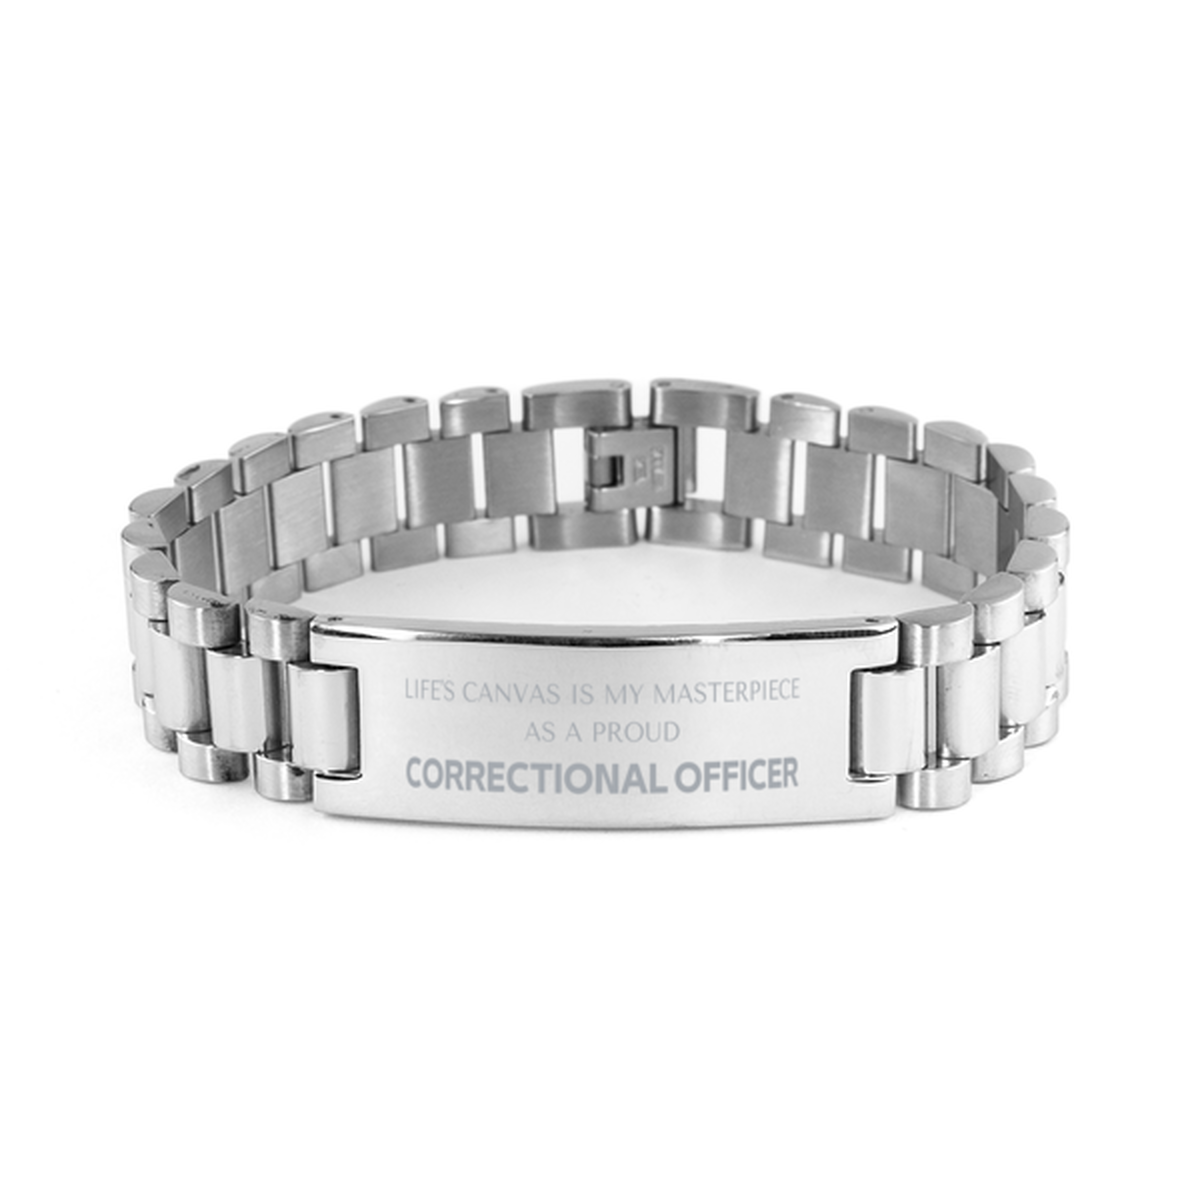 Proud Correctional Officer Gifts, Life's canvas is my masterpiece, Epic Birthday Christmas Unique Ladder Stainless Steel Bracelet For Correctional Officer, Coworkers, Men, Women, Friends